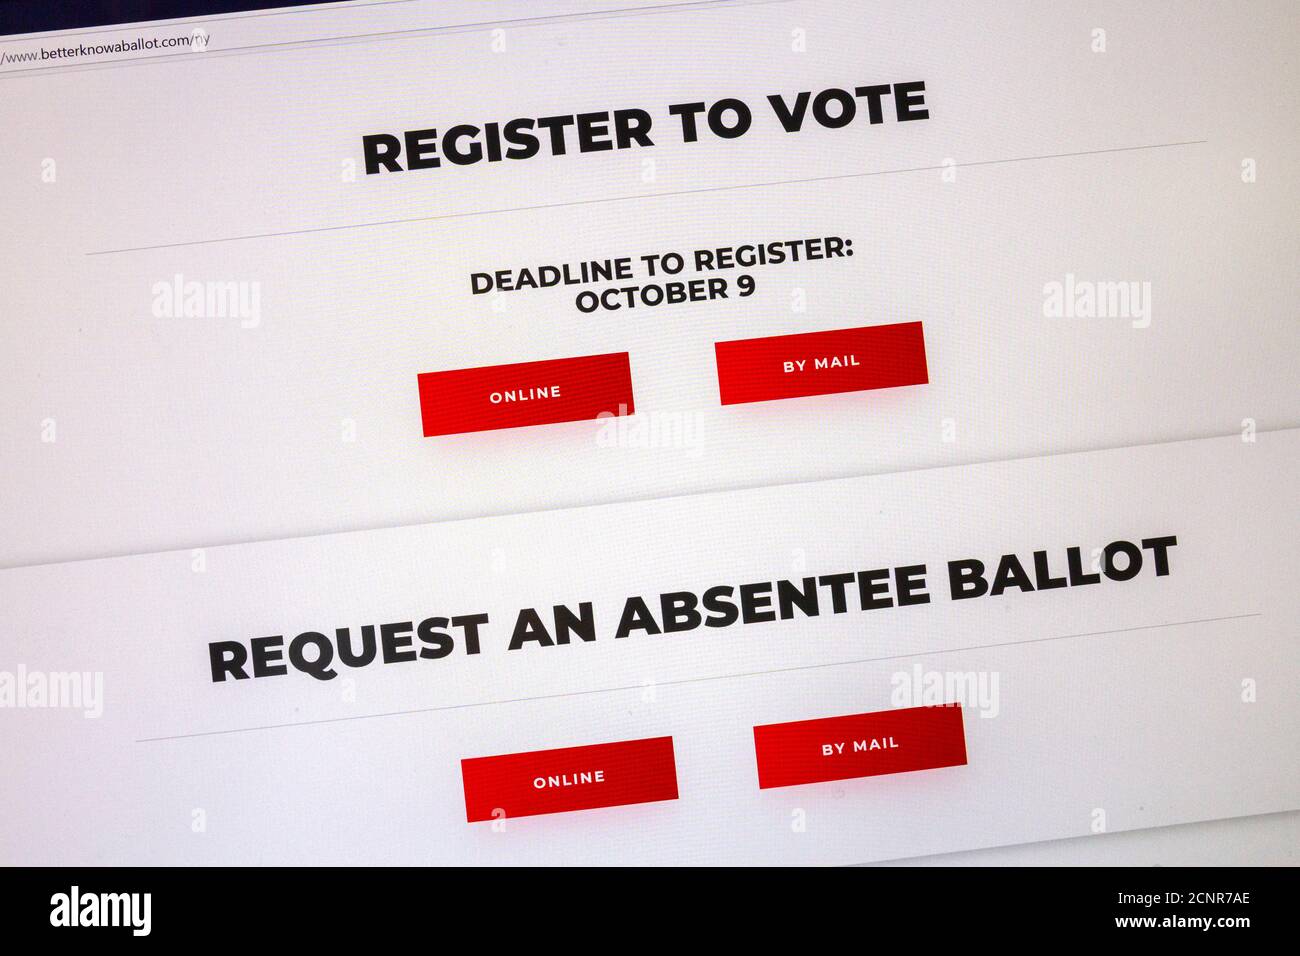 Screen shot of 'A Late Show with Stephen Colbert' website www. betterknowaballot.com with how to vote information for the 2020 US election. Stock Photo